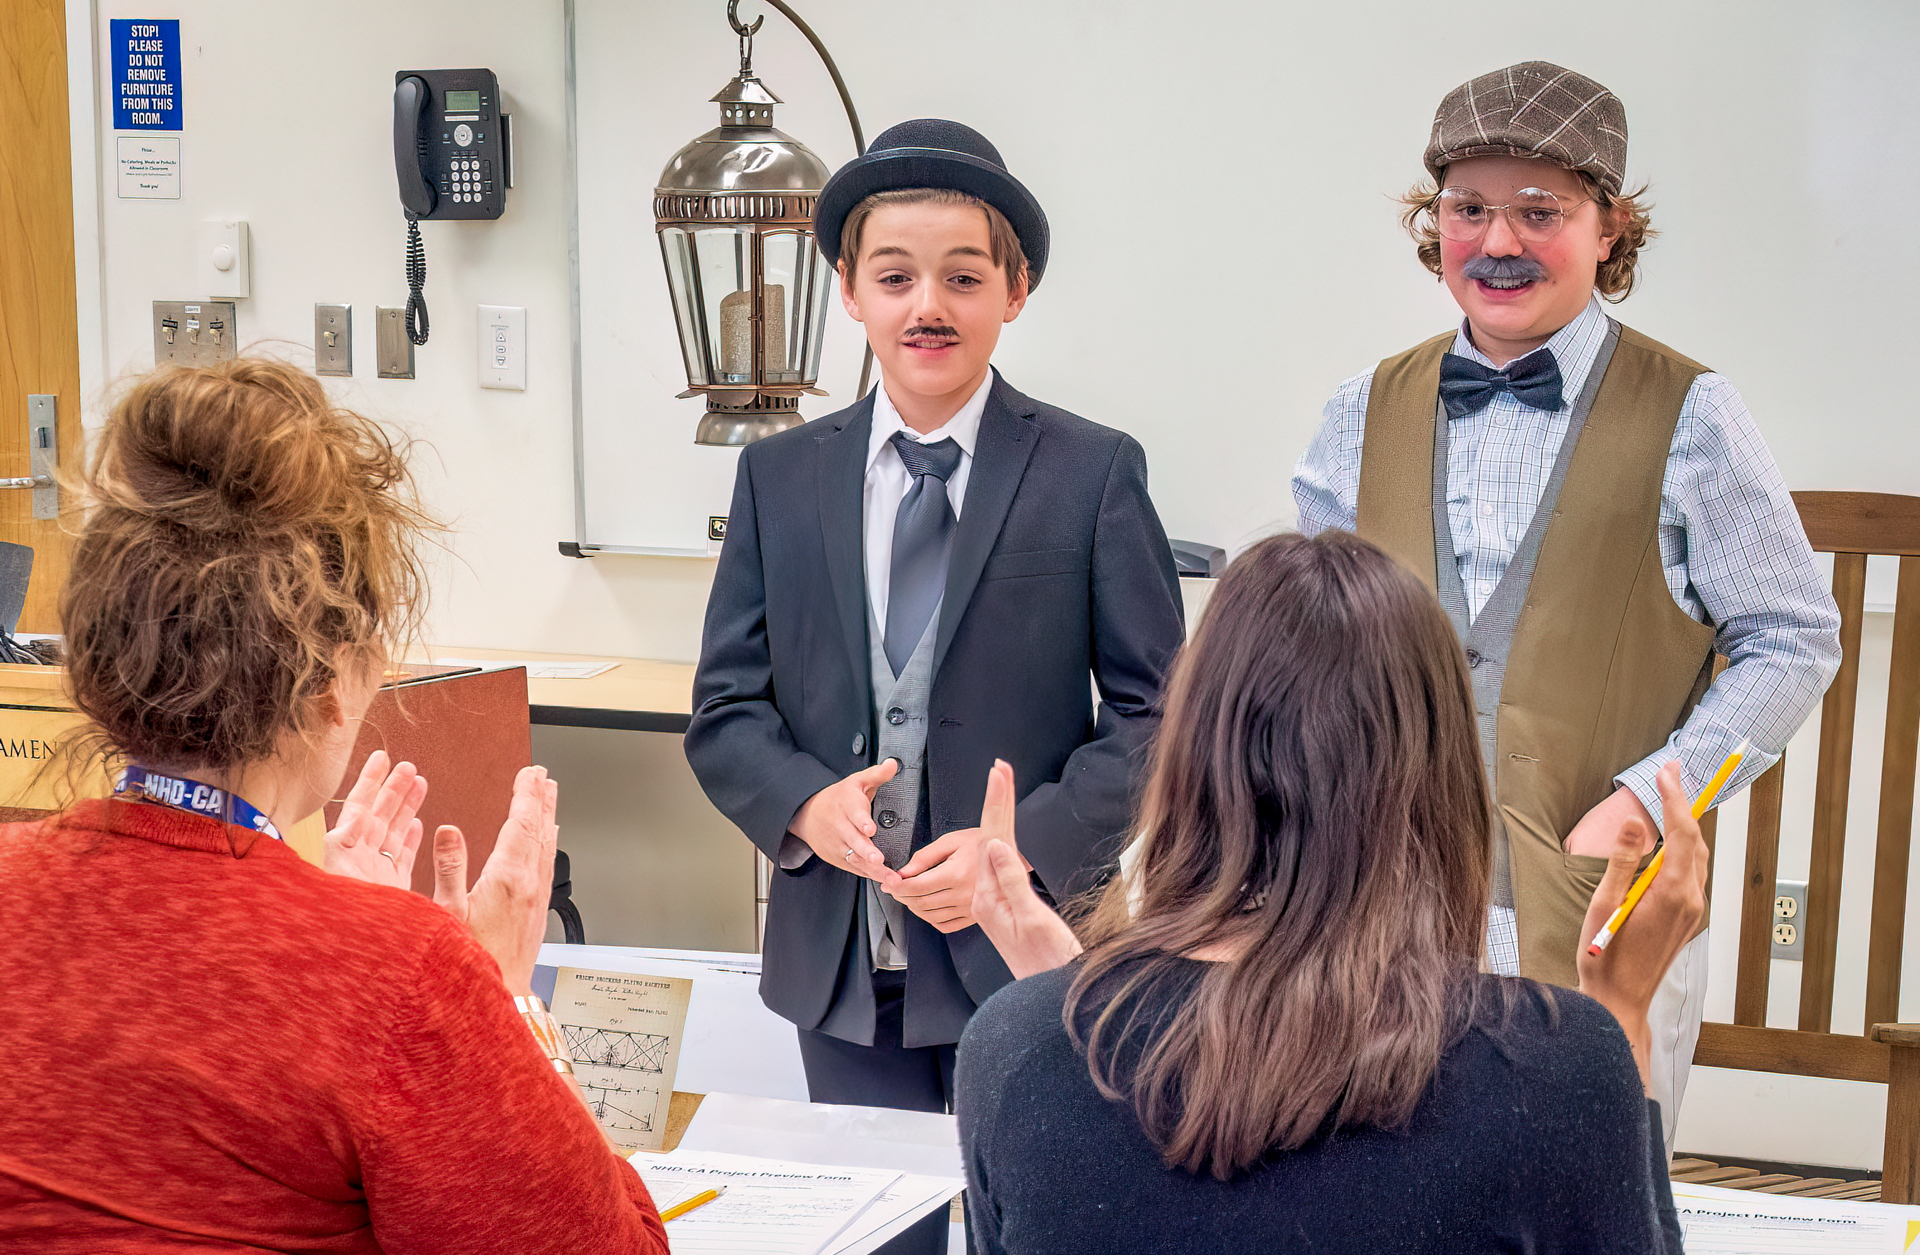 Two boys dressed in costumes portraying historical figures present their project to judges.